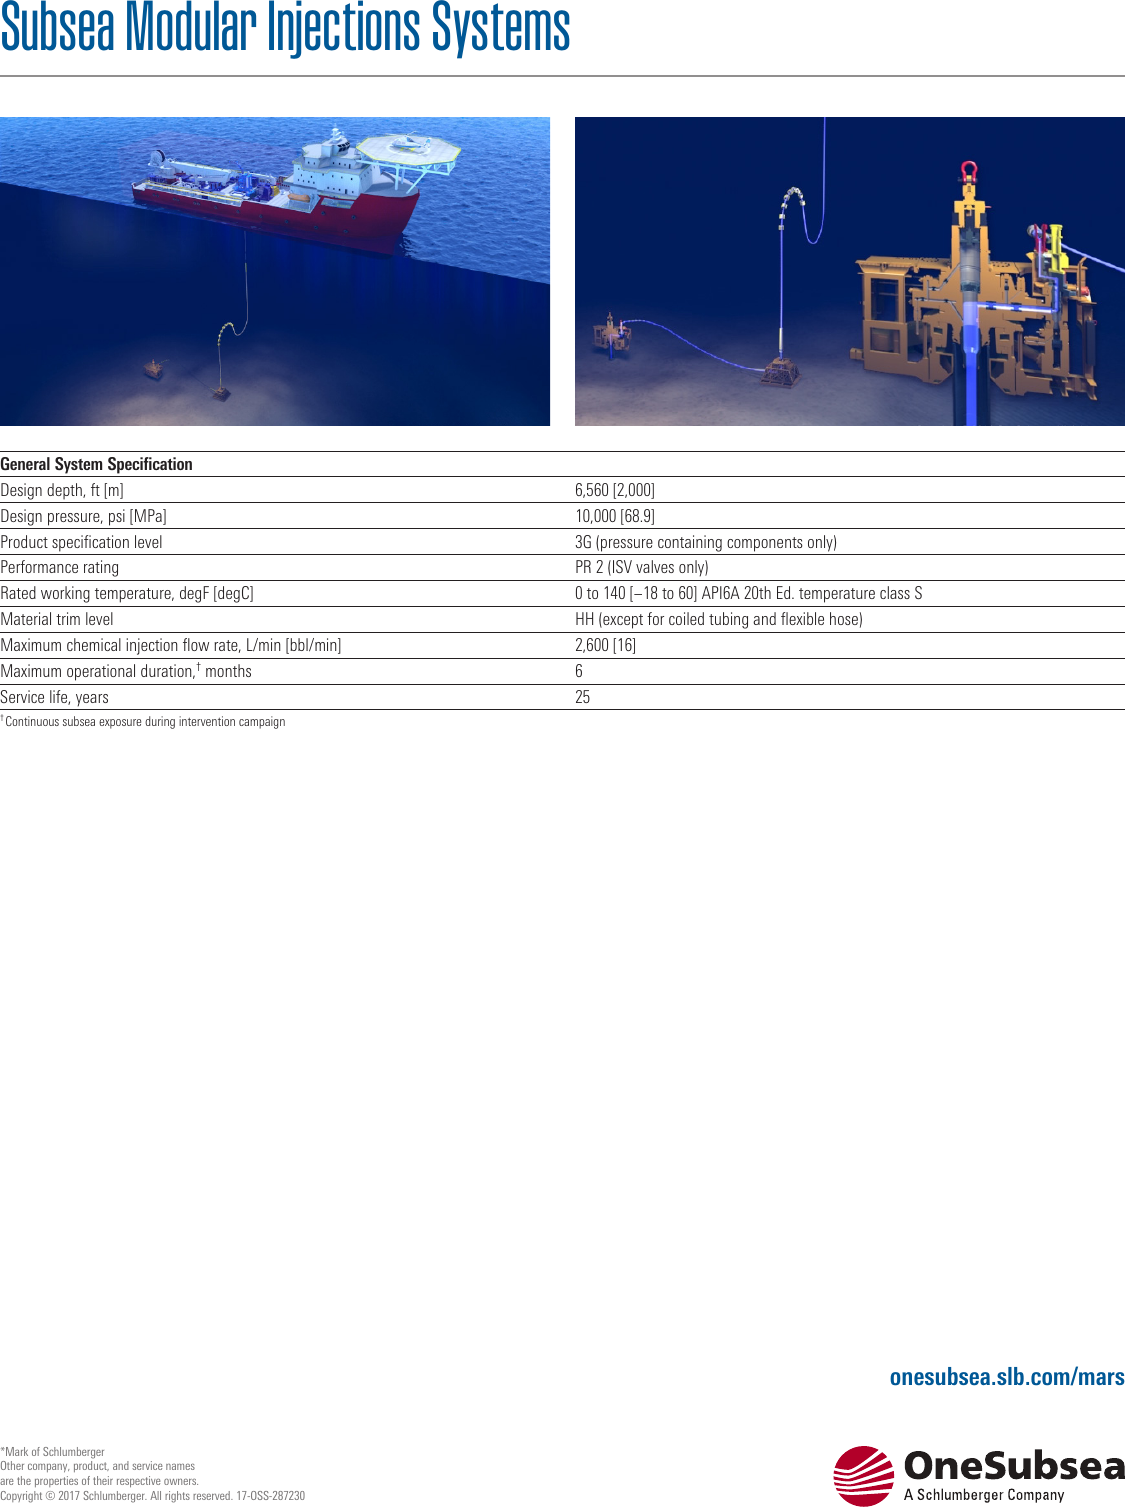 Page 2 of 2 - Subsea Modular Injection Systems Oss-subsea-modular-injection-systems-ps